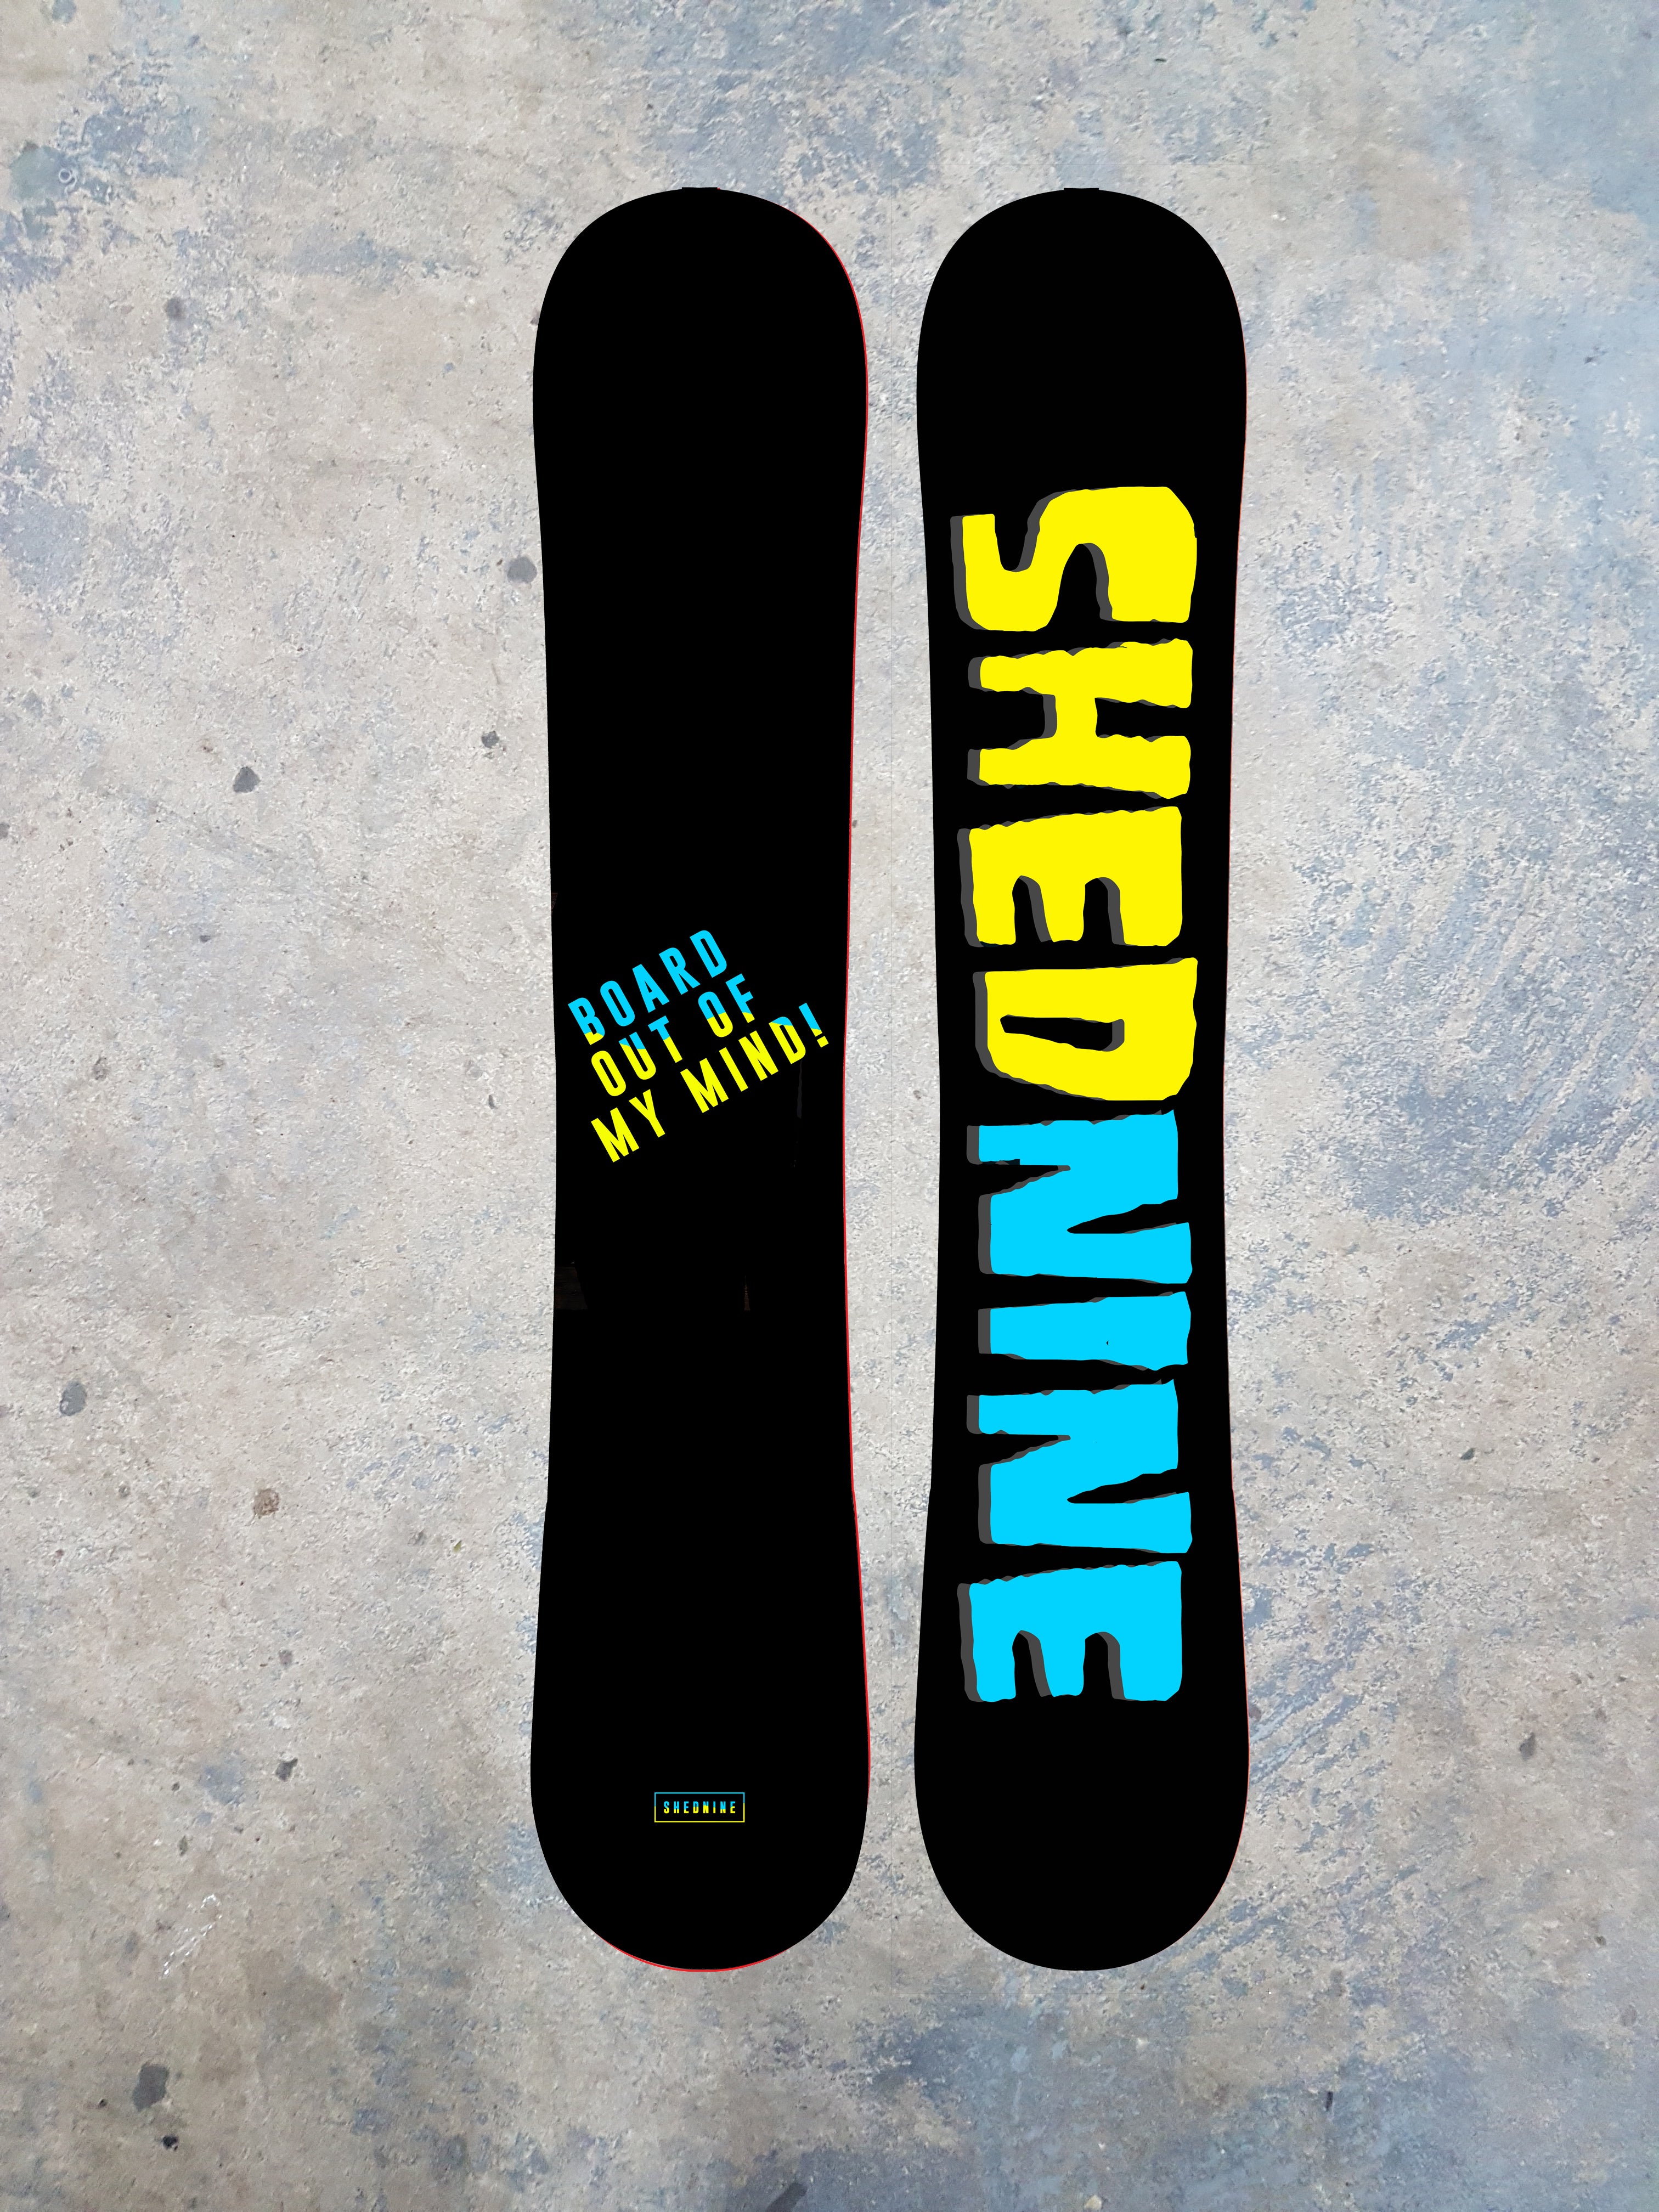 ShedNine "Bored Out Of My Mind" Custom Snowboard -  Snowboard, Shed Nine, Shed Nine